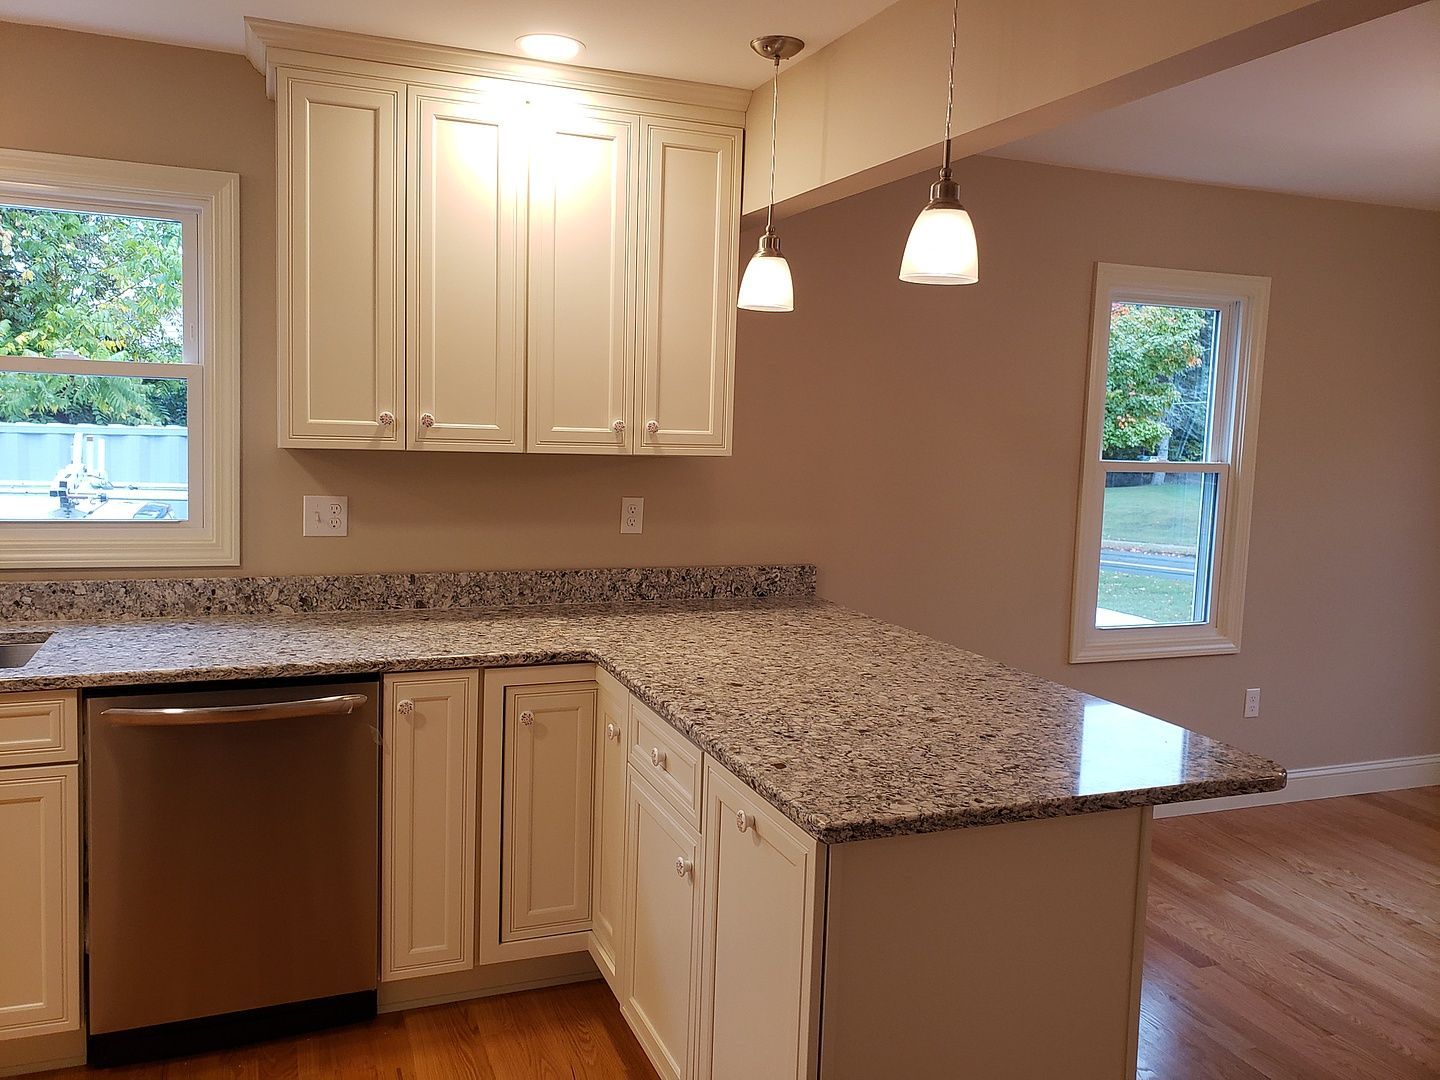 A kitchen with granite counter tops , white cabinets and a stainless steel dishwasher.